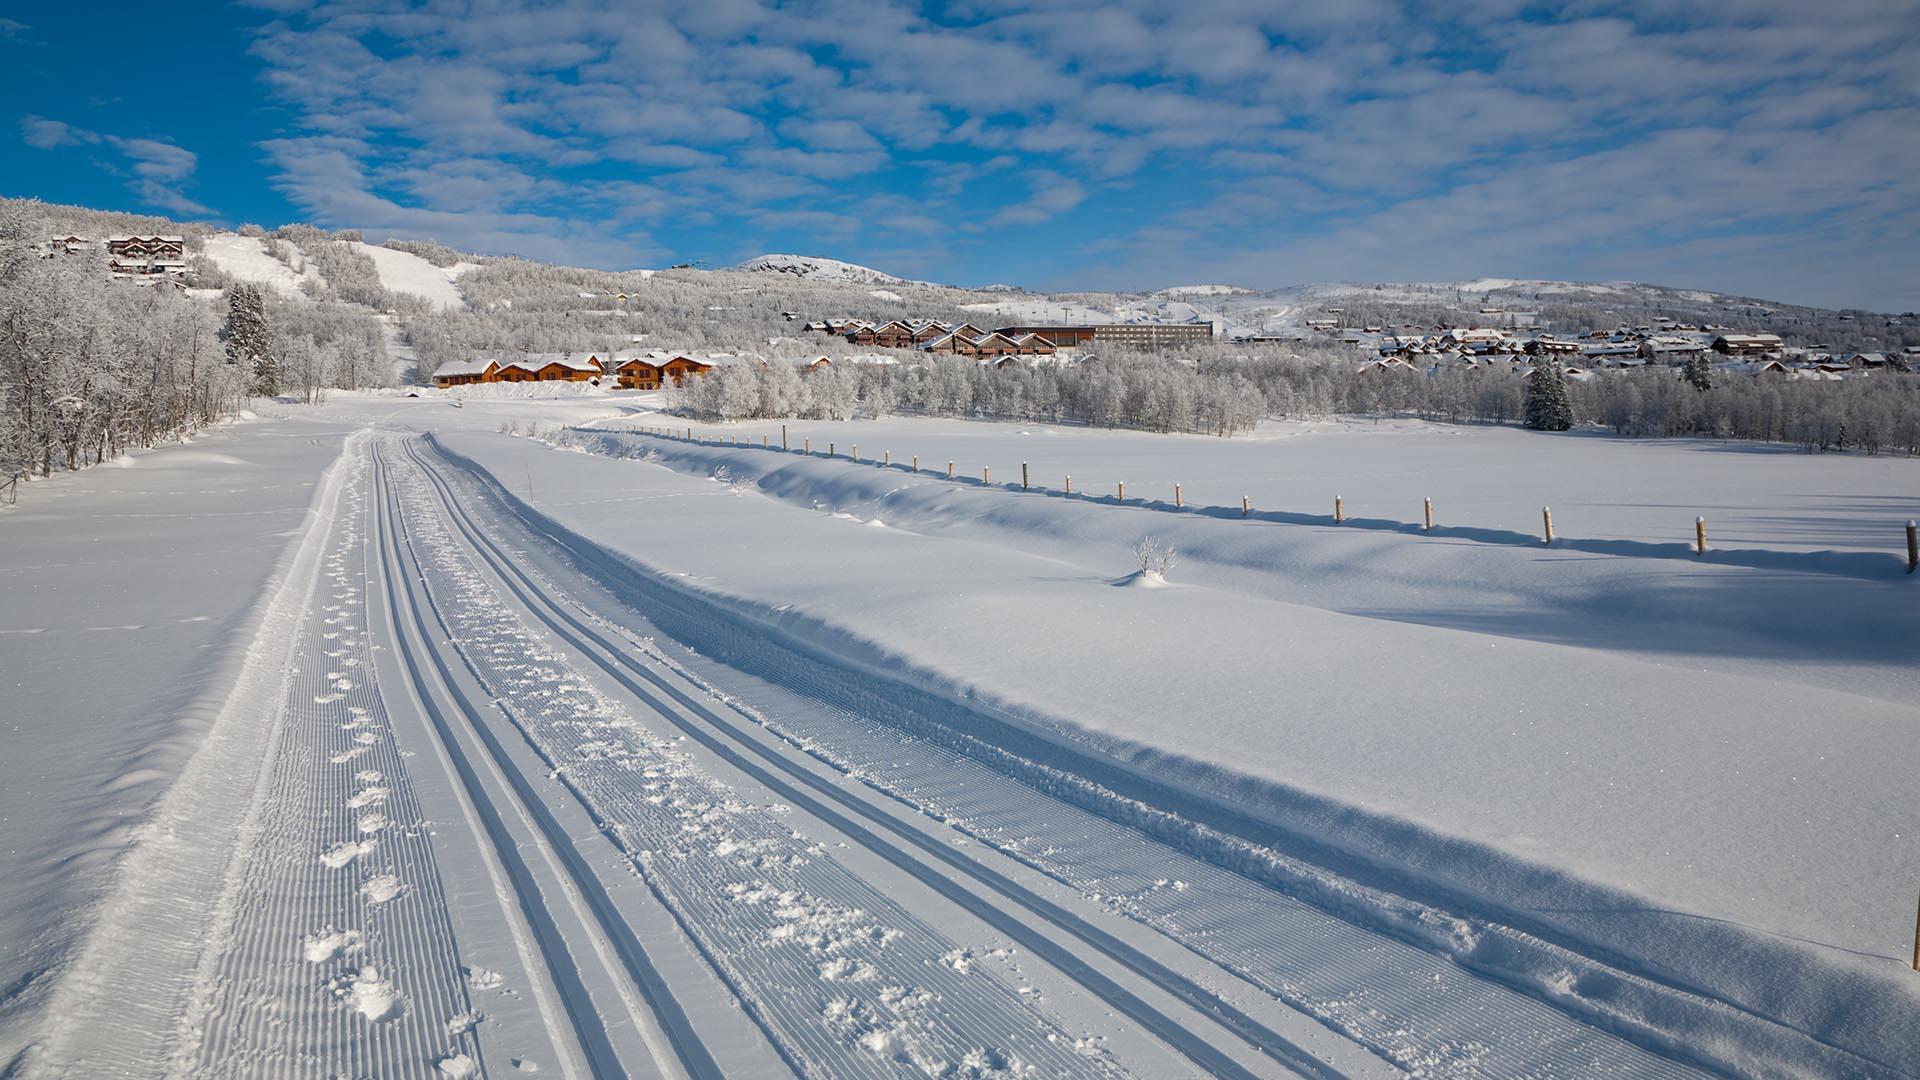 Freshly groomed cross-country skiing track over a flat area below mountain village.